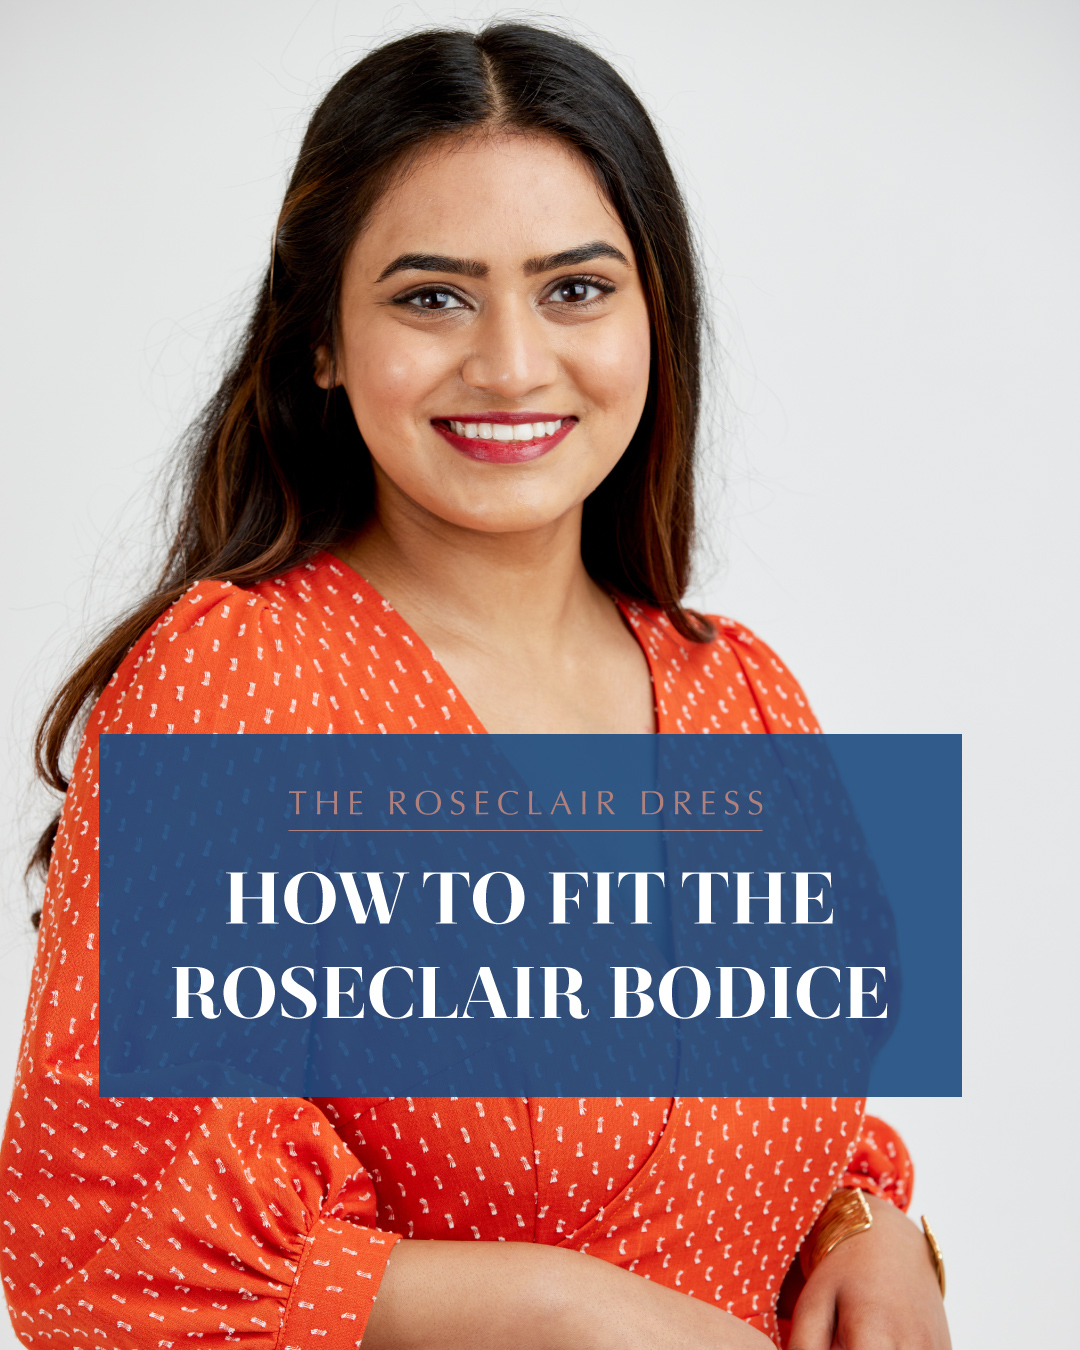 The Roseclair Dress: How to fit the Roseclair Bodice